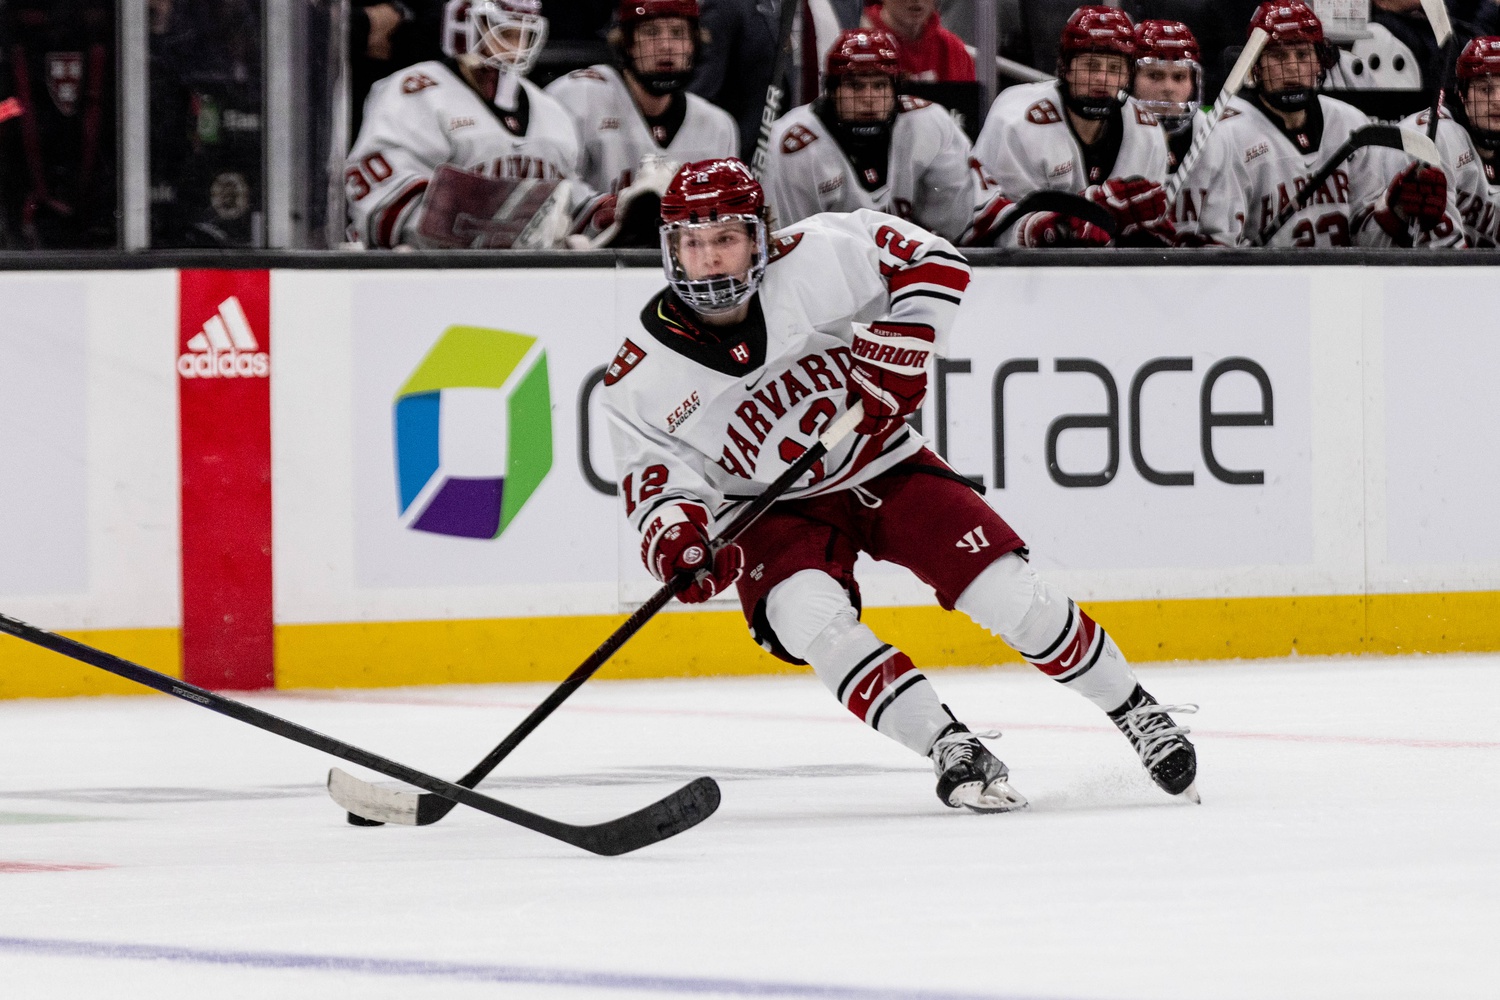 Then-first year forward Joe Miller skates through the neutral zone in the 2023 Beanpot Championship game on February 13.